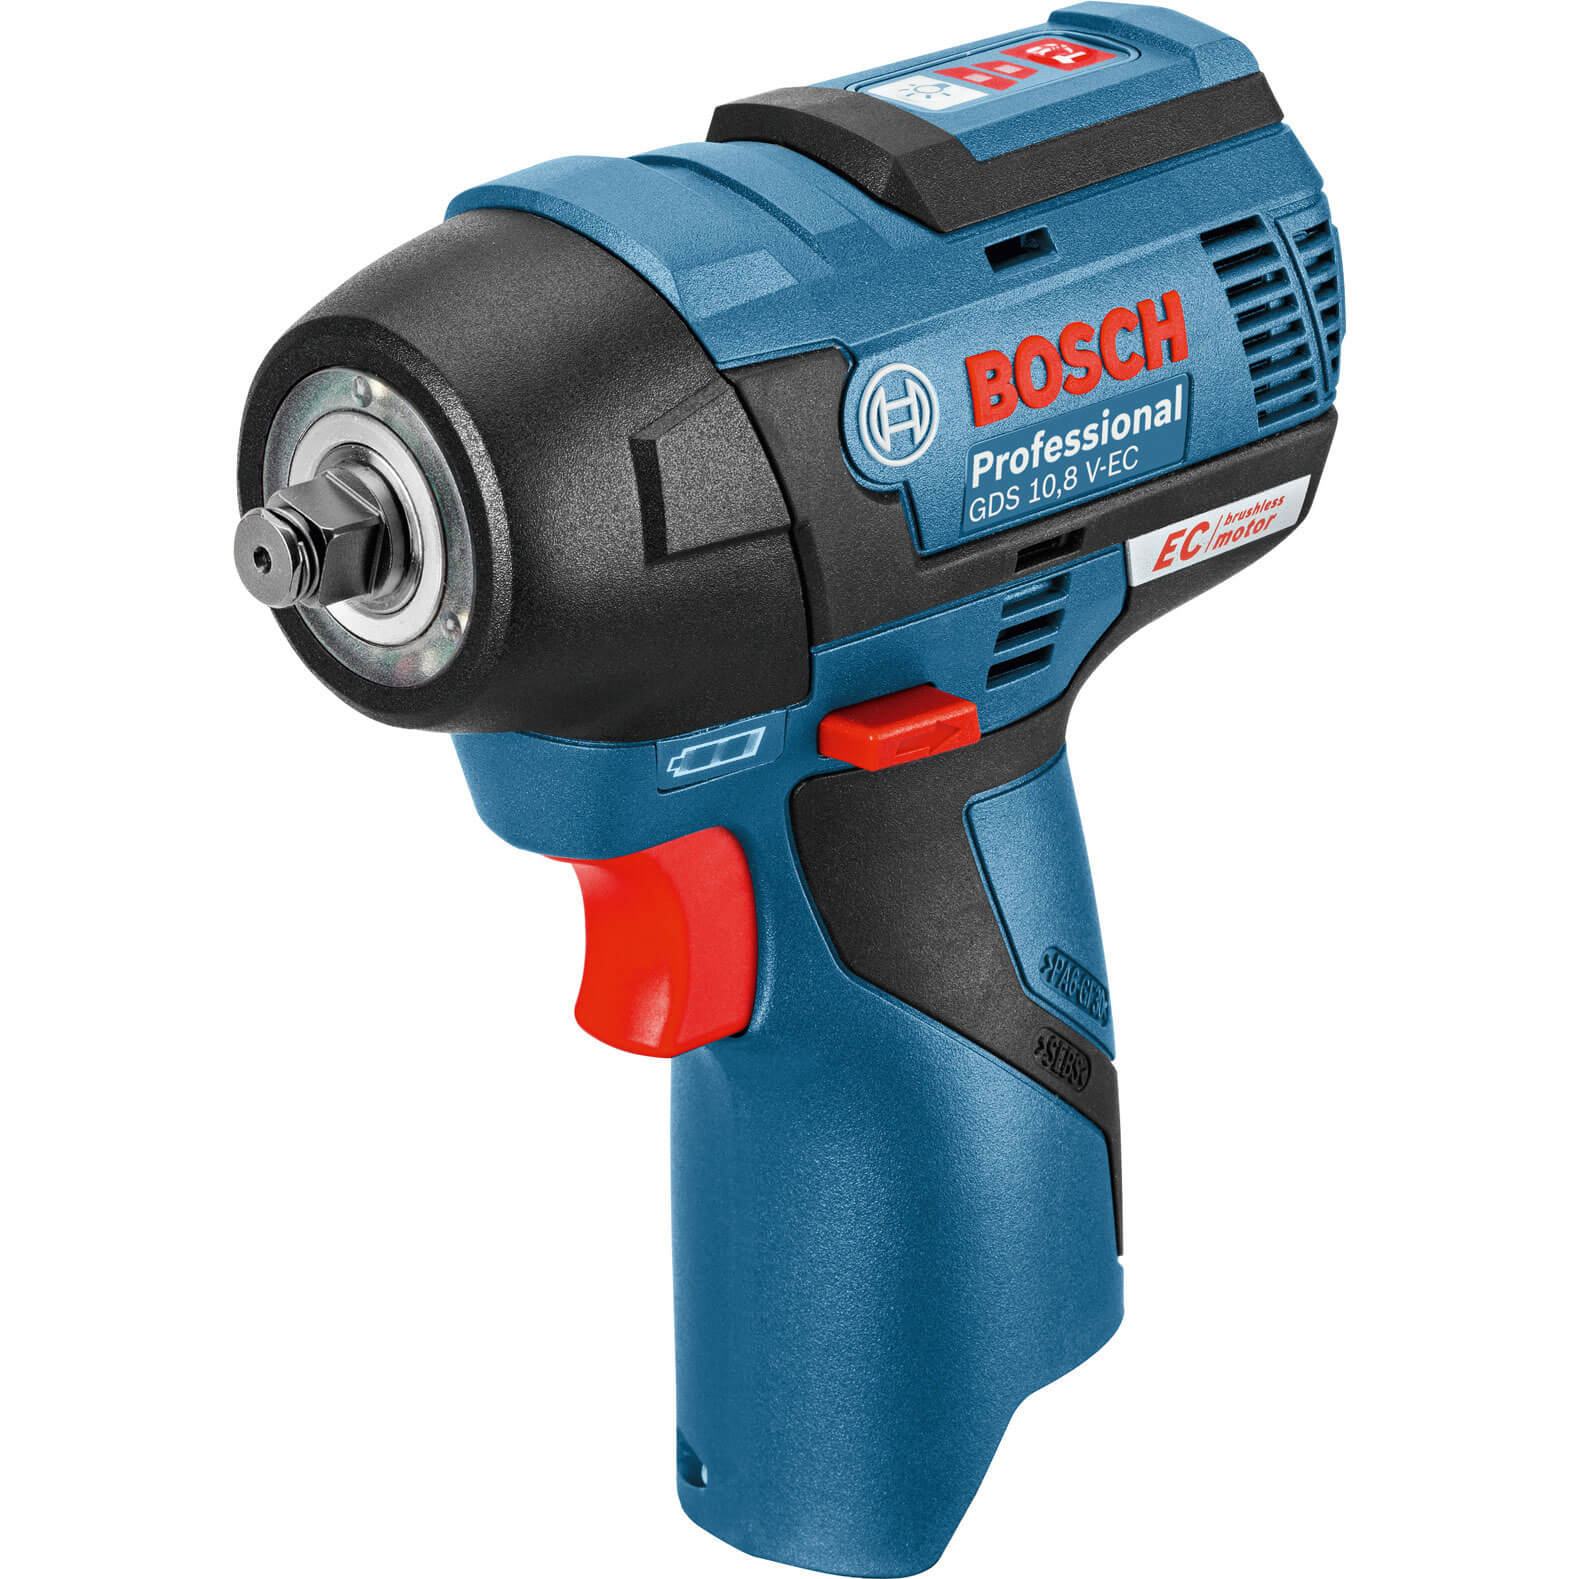 Image of Bosch GDS 12V-EC 12v Cordless Brushless 3/8" Impact Wrench No Batteries No Charger No Case